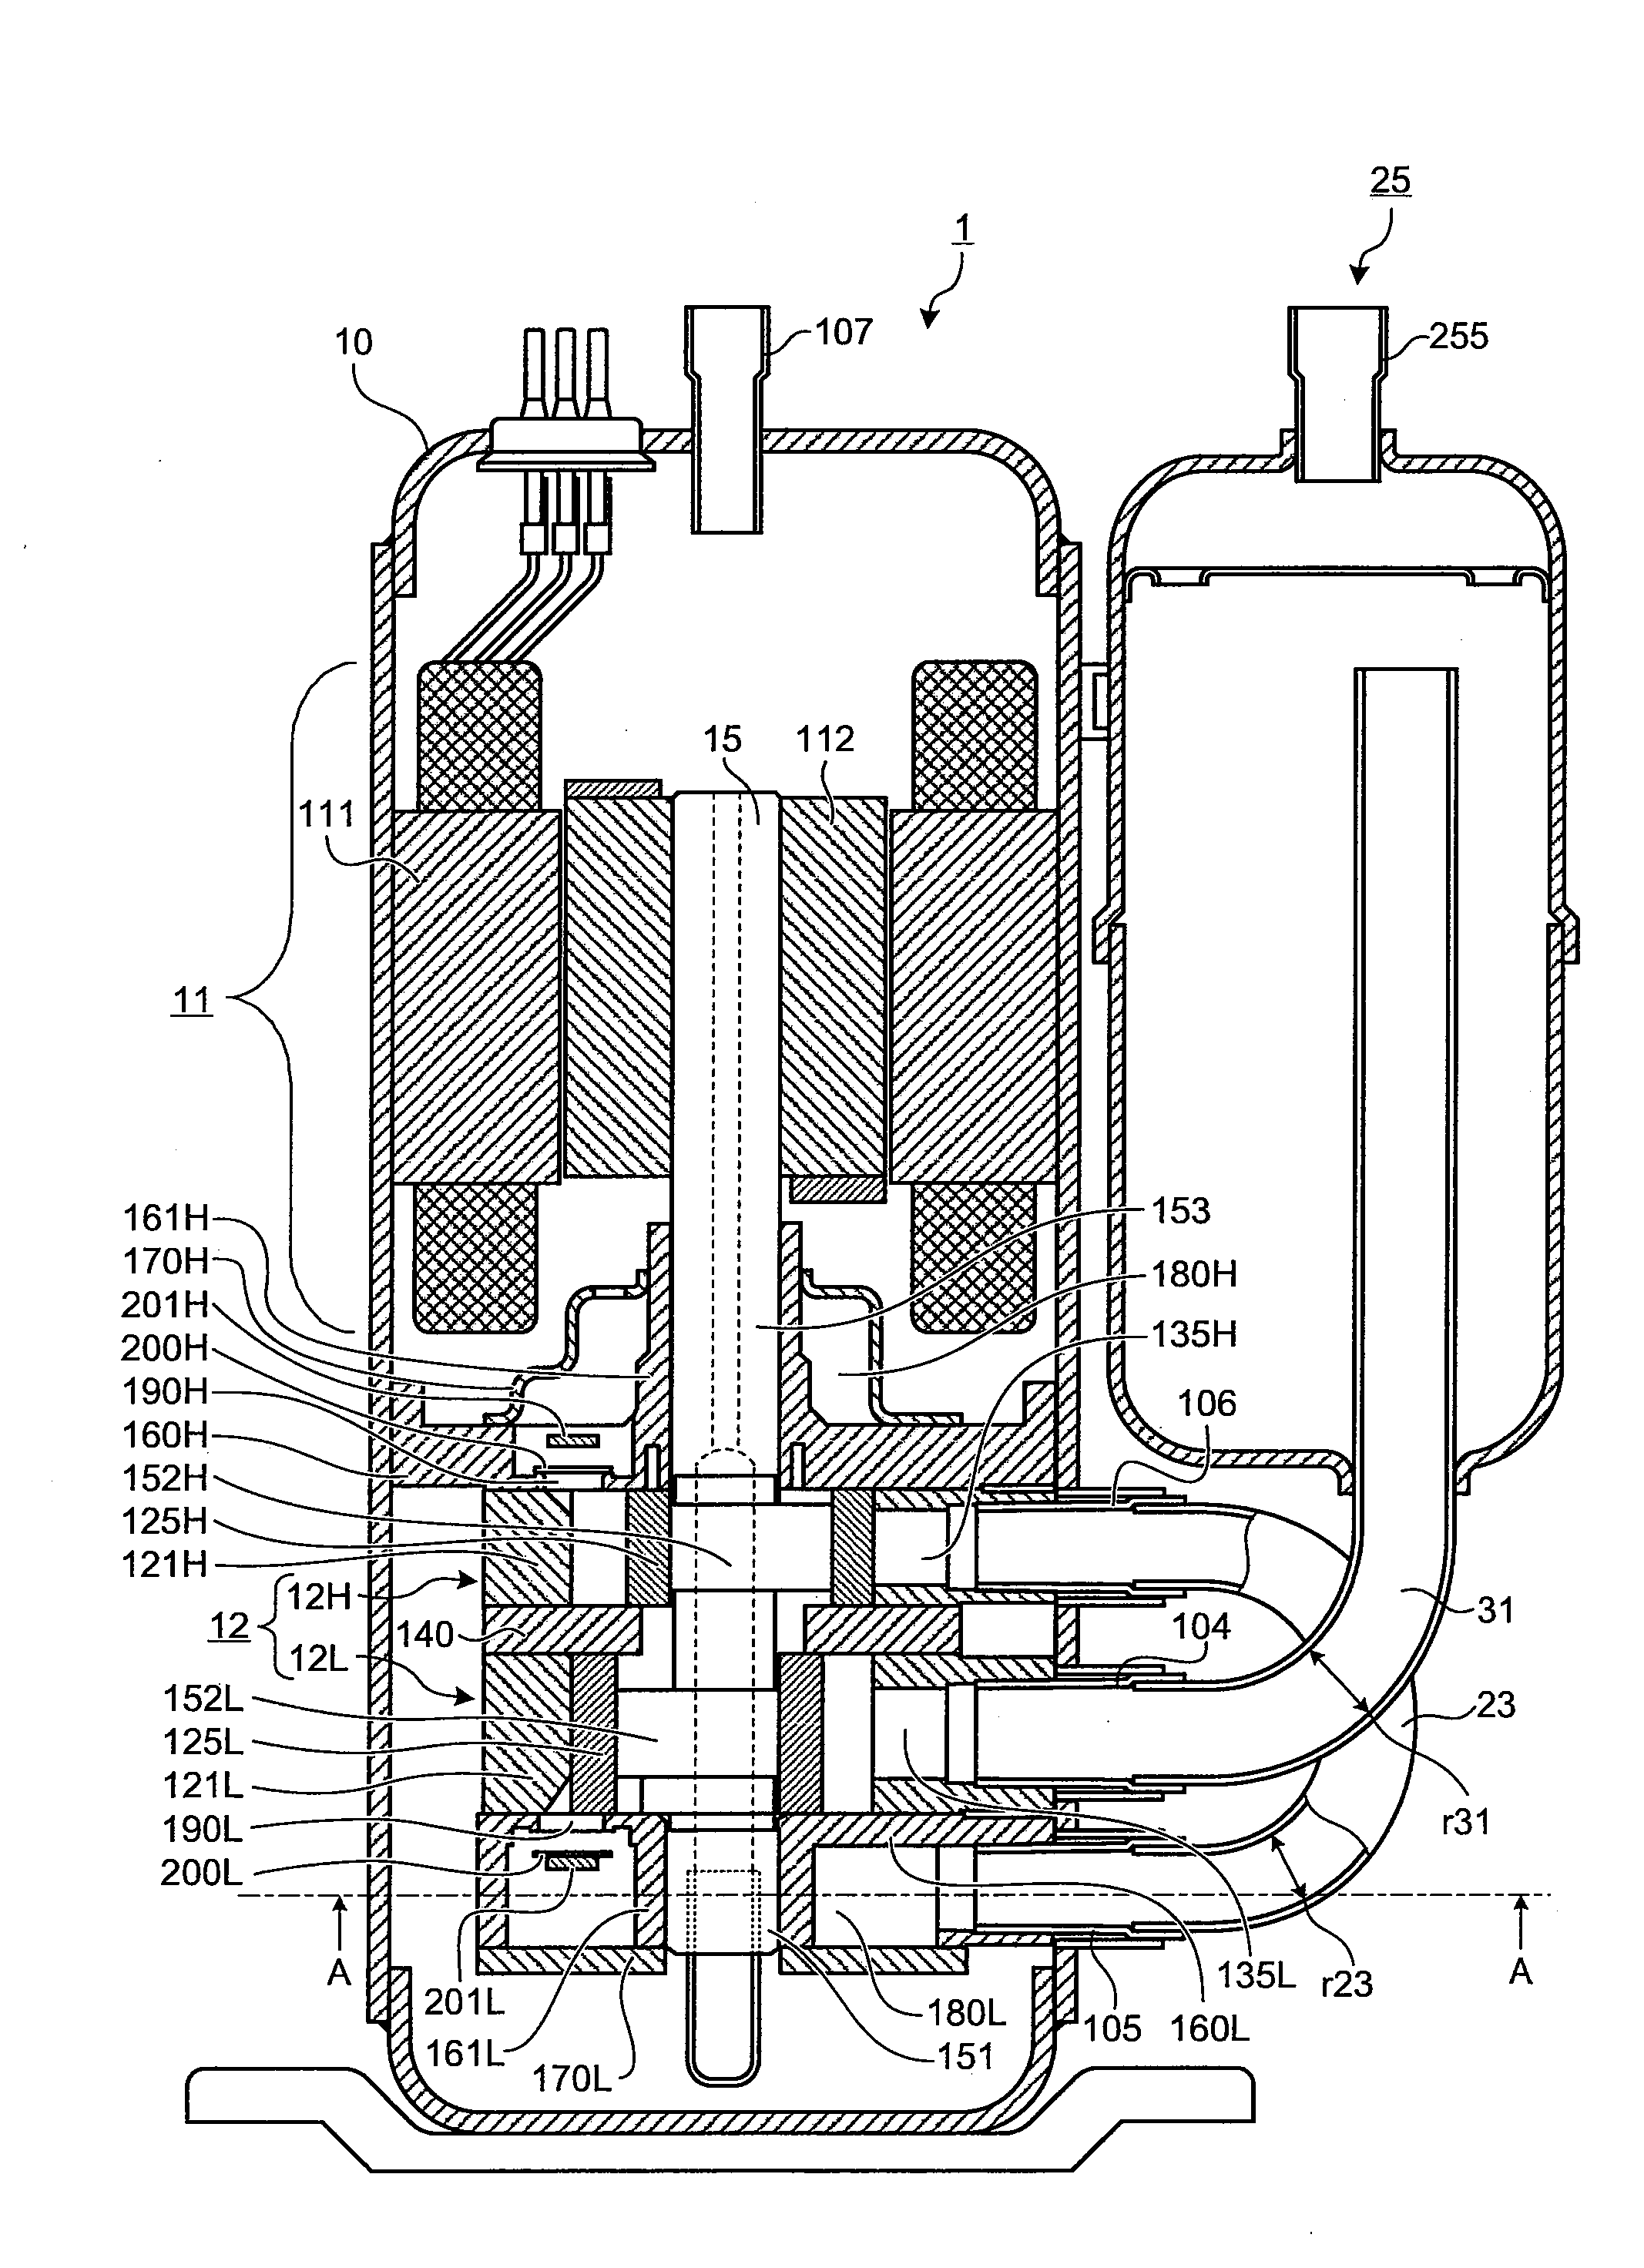 Two-stage compression rotary compressor